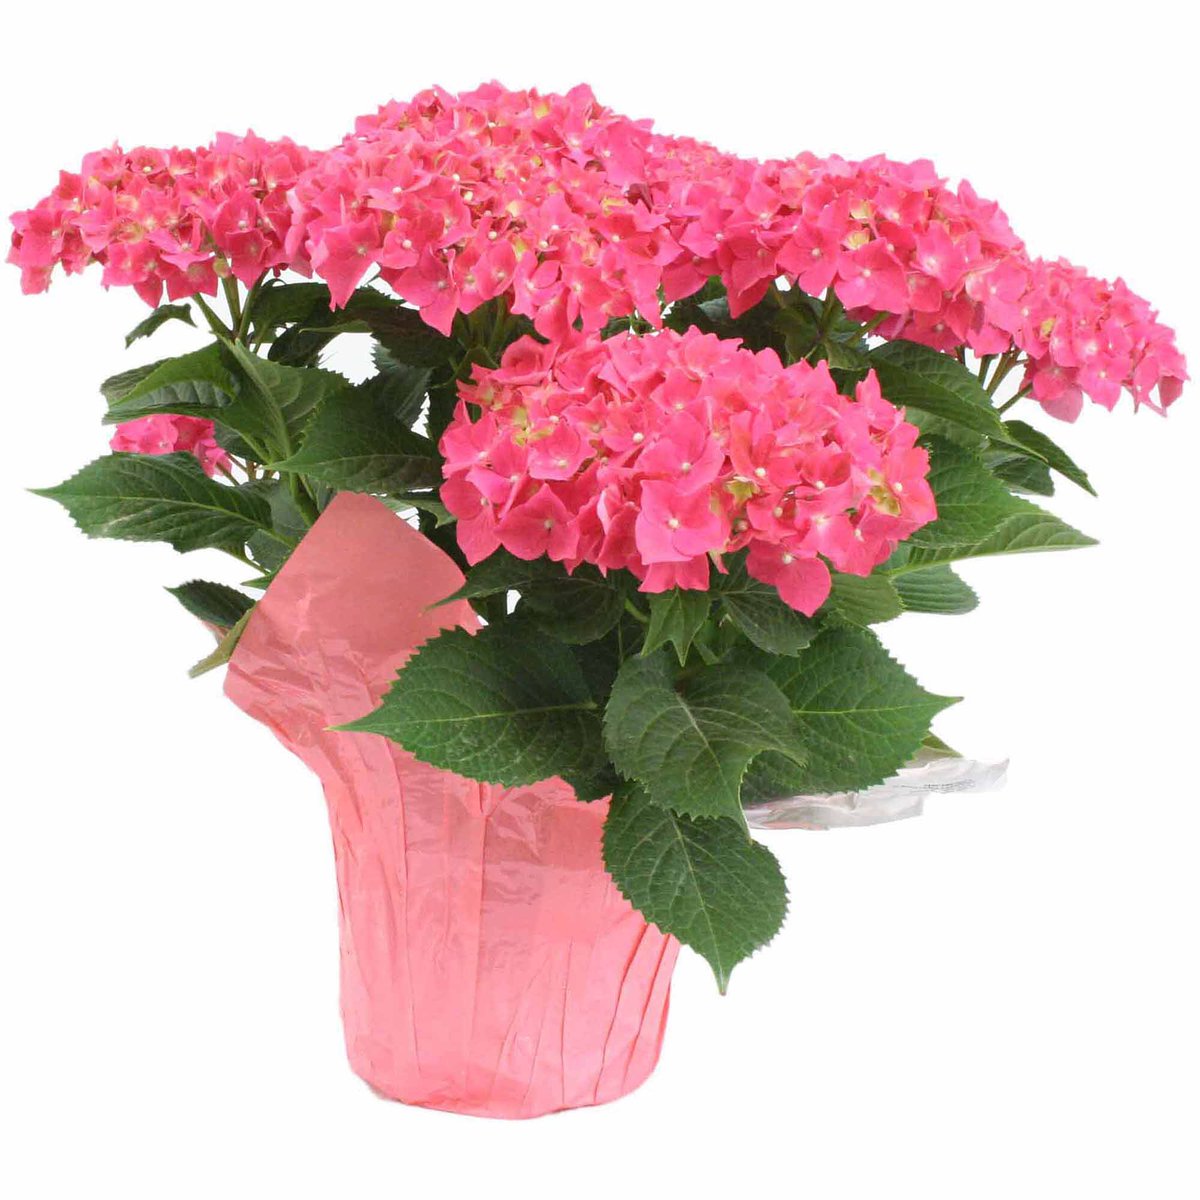 Picture is of a pink hydrangea plant.In order to look big a fluffy, these guys have been under optimal light, getting juiced up with fertilizers and things and are incredibly root bound in their pots. There isn’t enough soil to hold moisture long enough for them to drink.